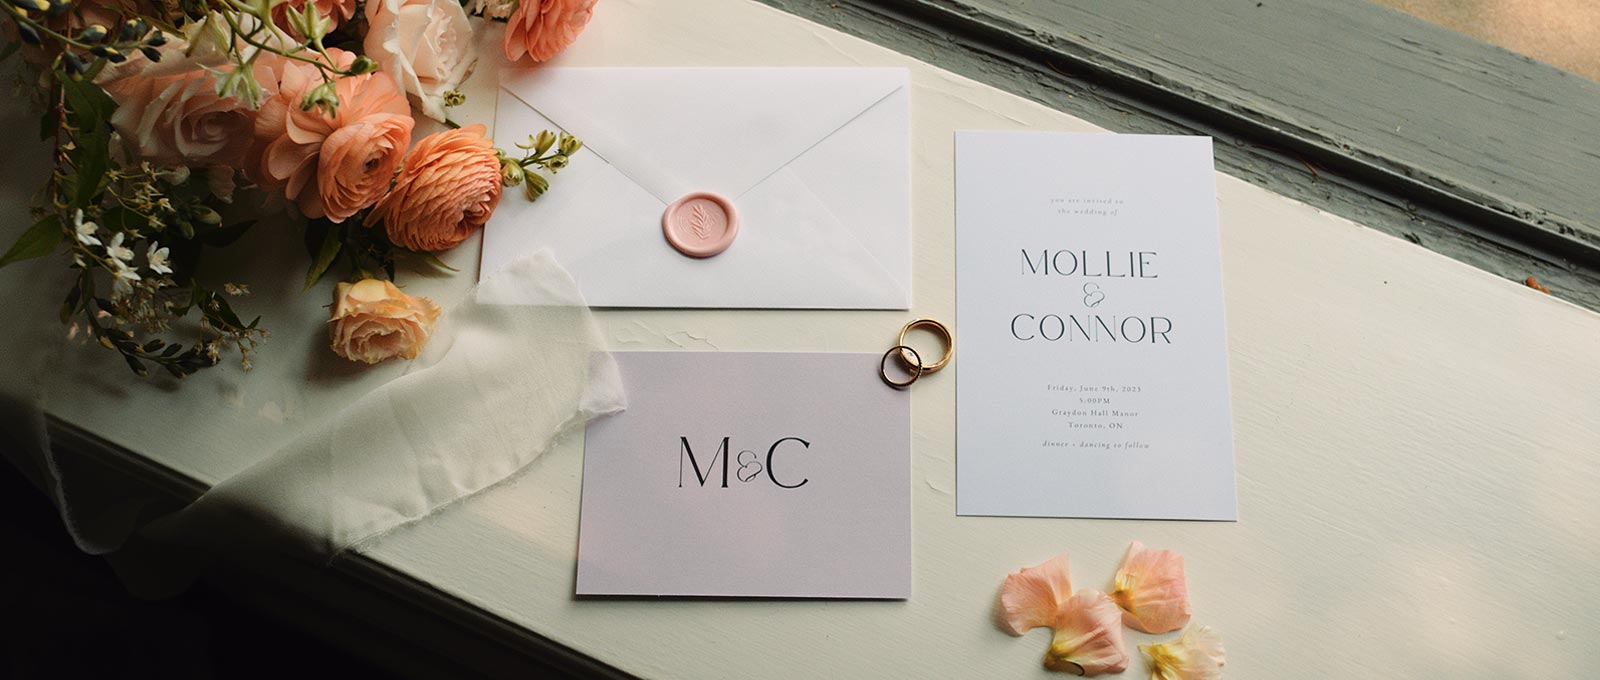 Mollie and Connor's wedding stationery details on a window sill at Graydon Hall Manor.